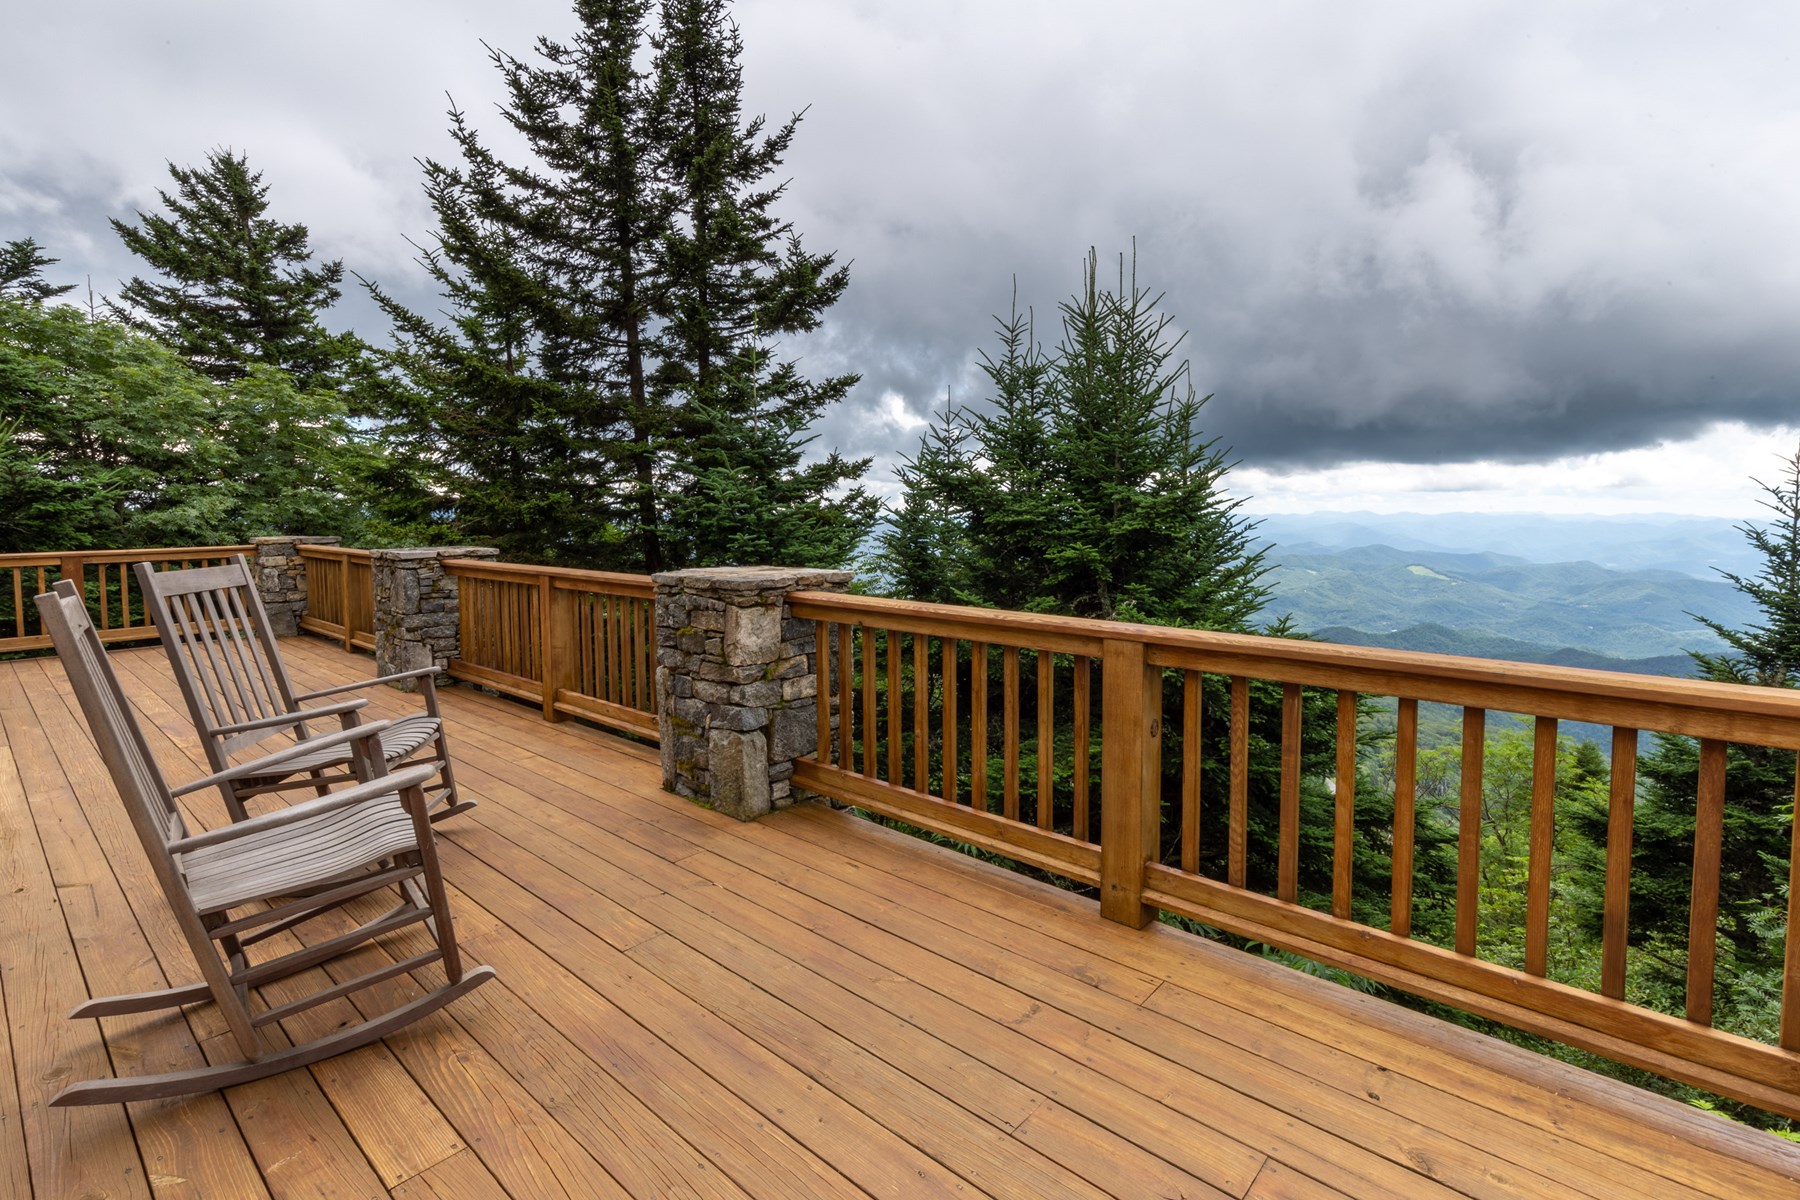 Located within the gated community of High Mountain, the cottage has a large deck looking out over the mountains.